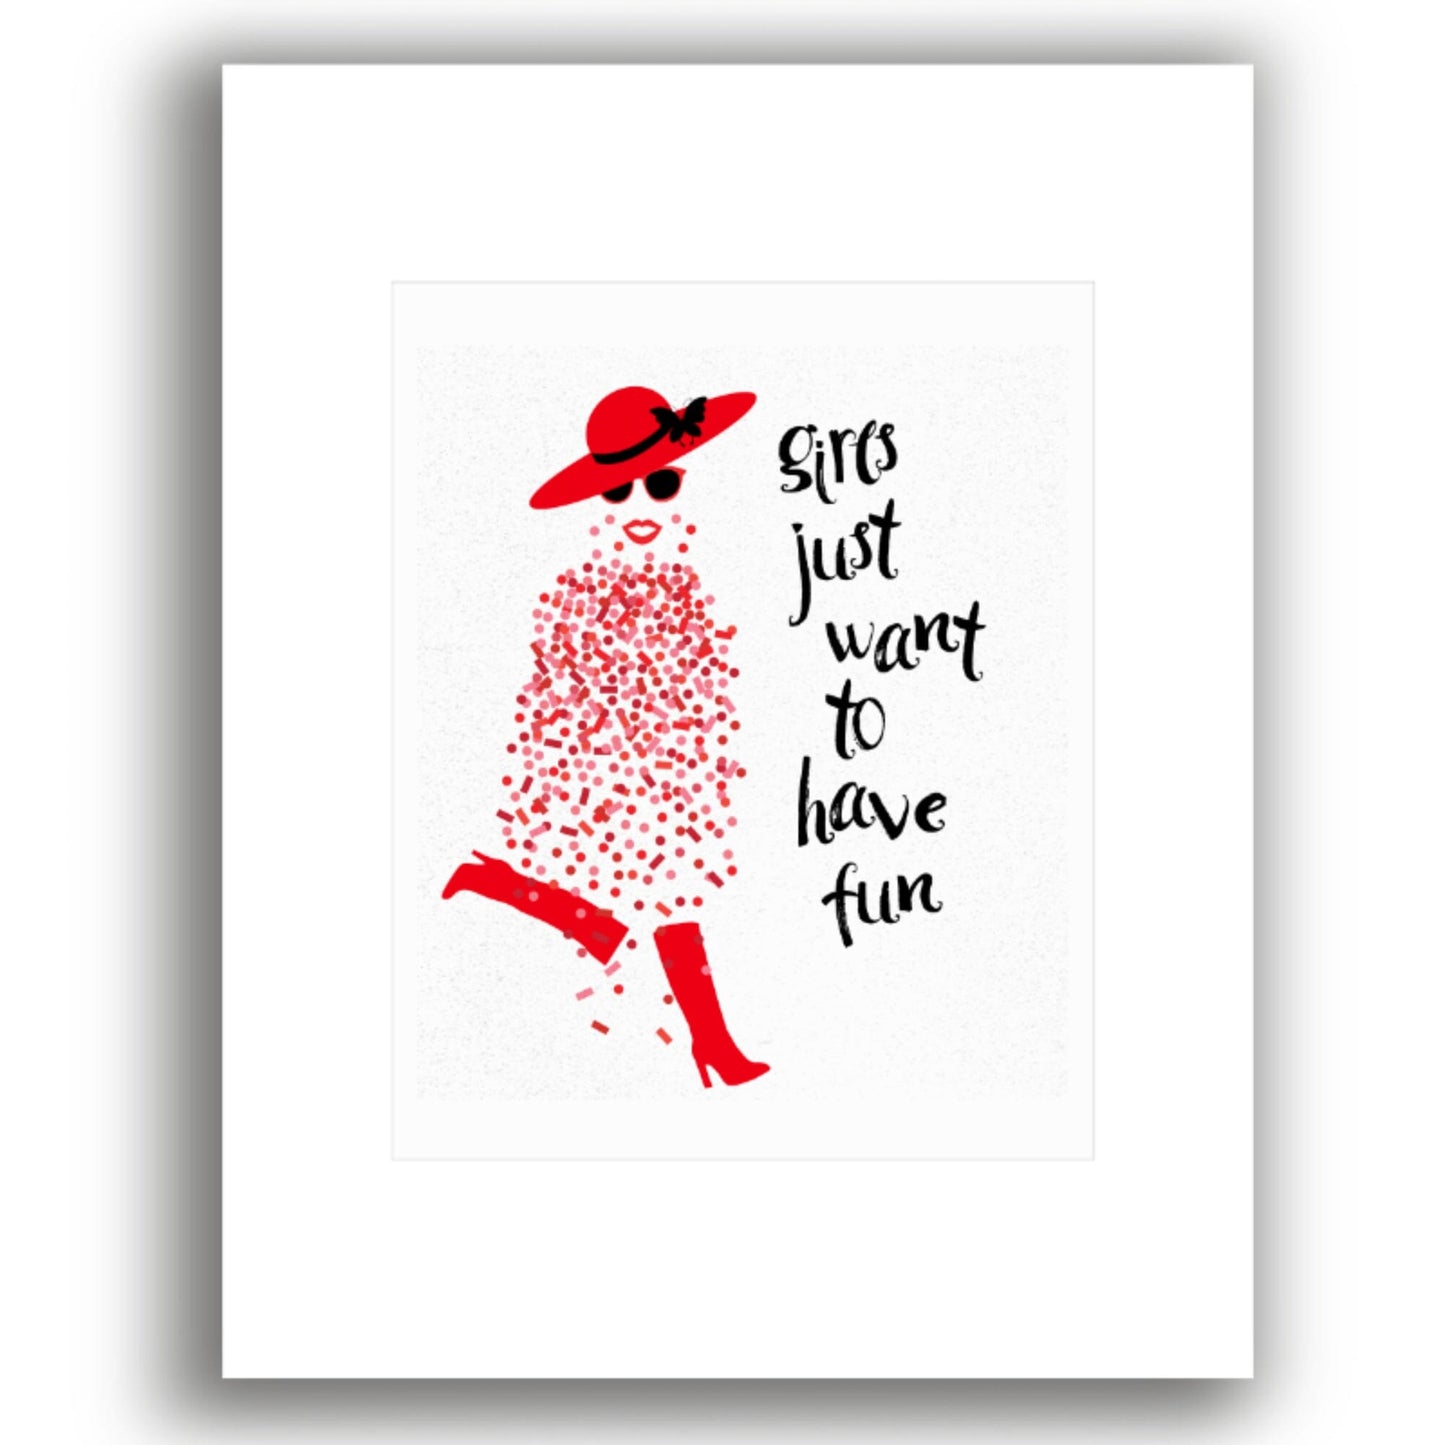 Girls Just Want to Have Fun by Cyndi Lauper - Lyric Inspired Art Song Lyrics Art Song Lyrics Art 8x10 White Matted Print 